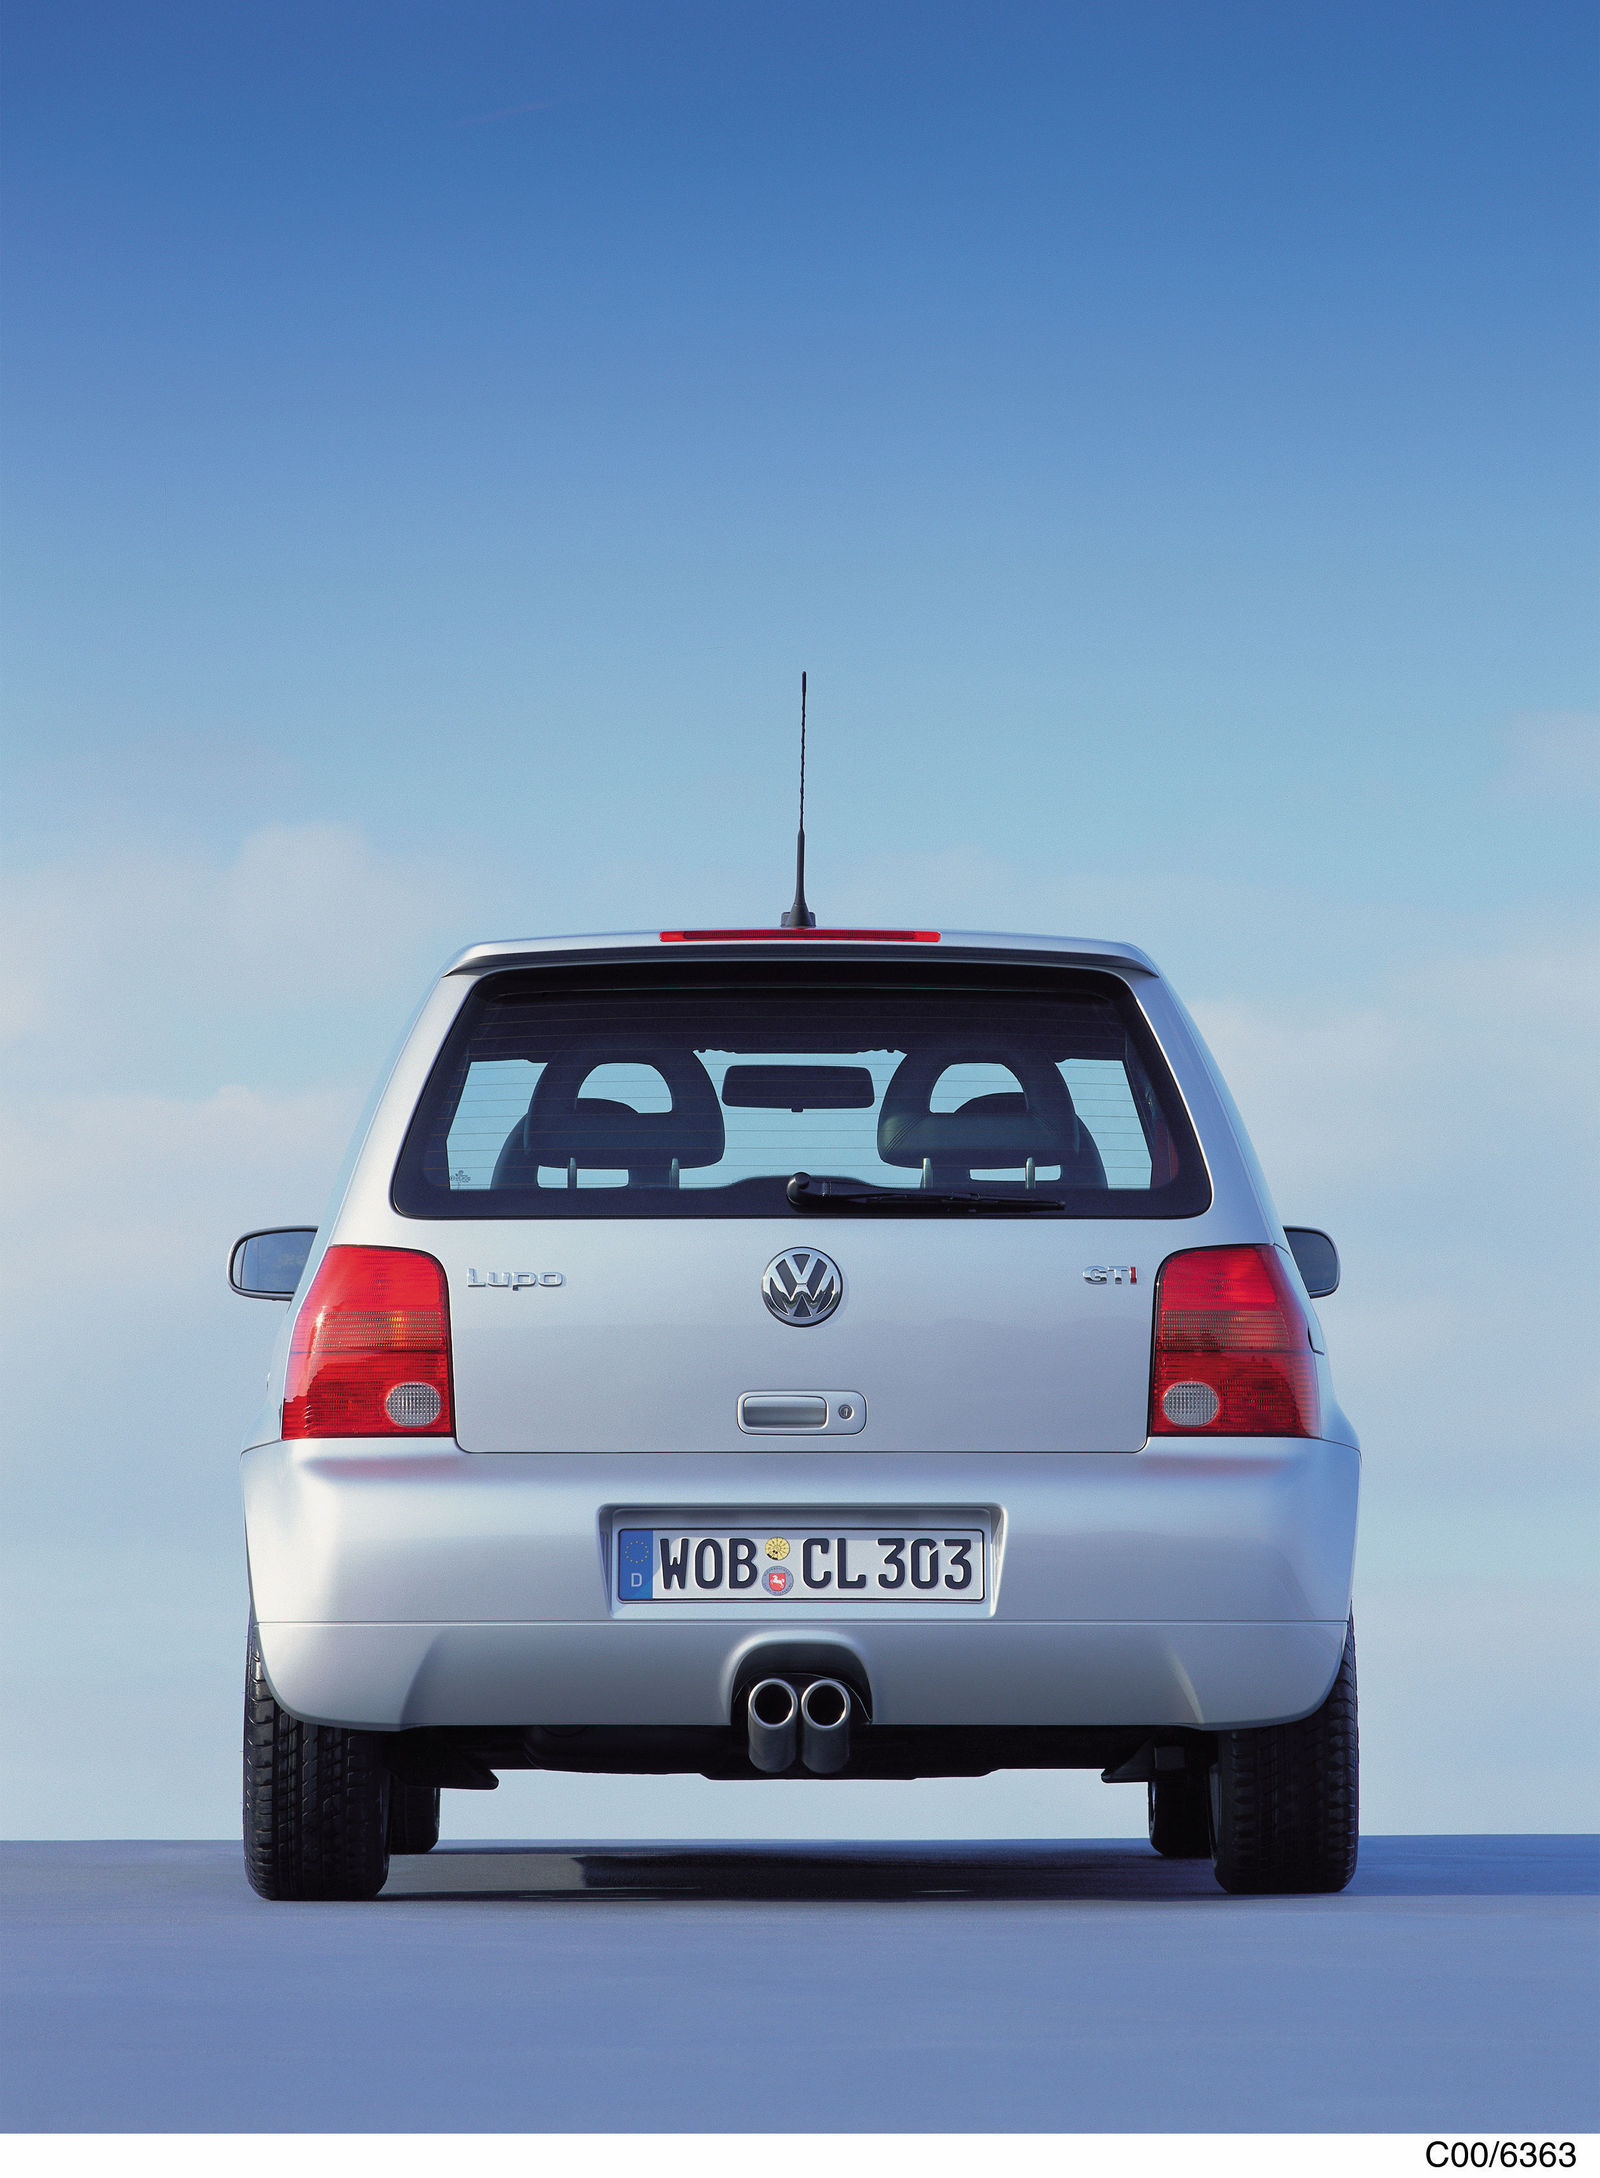 Product: Lupo GTI (2000)